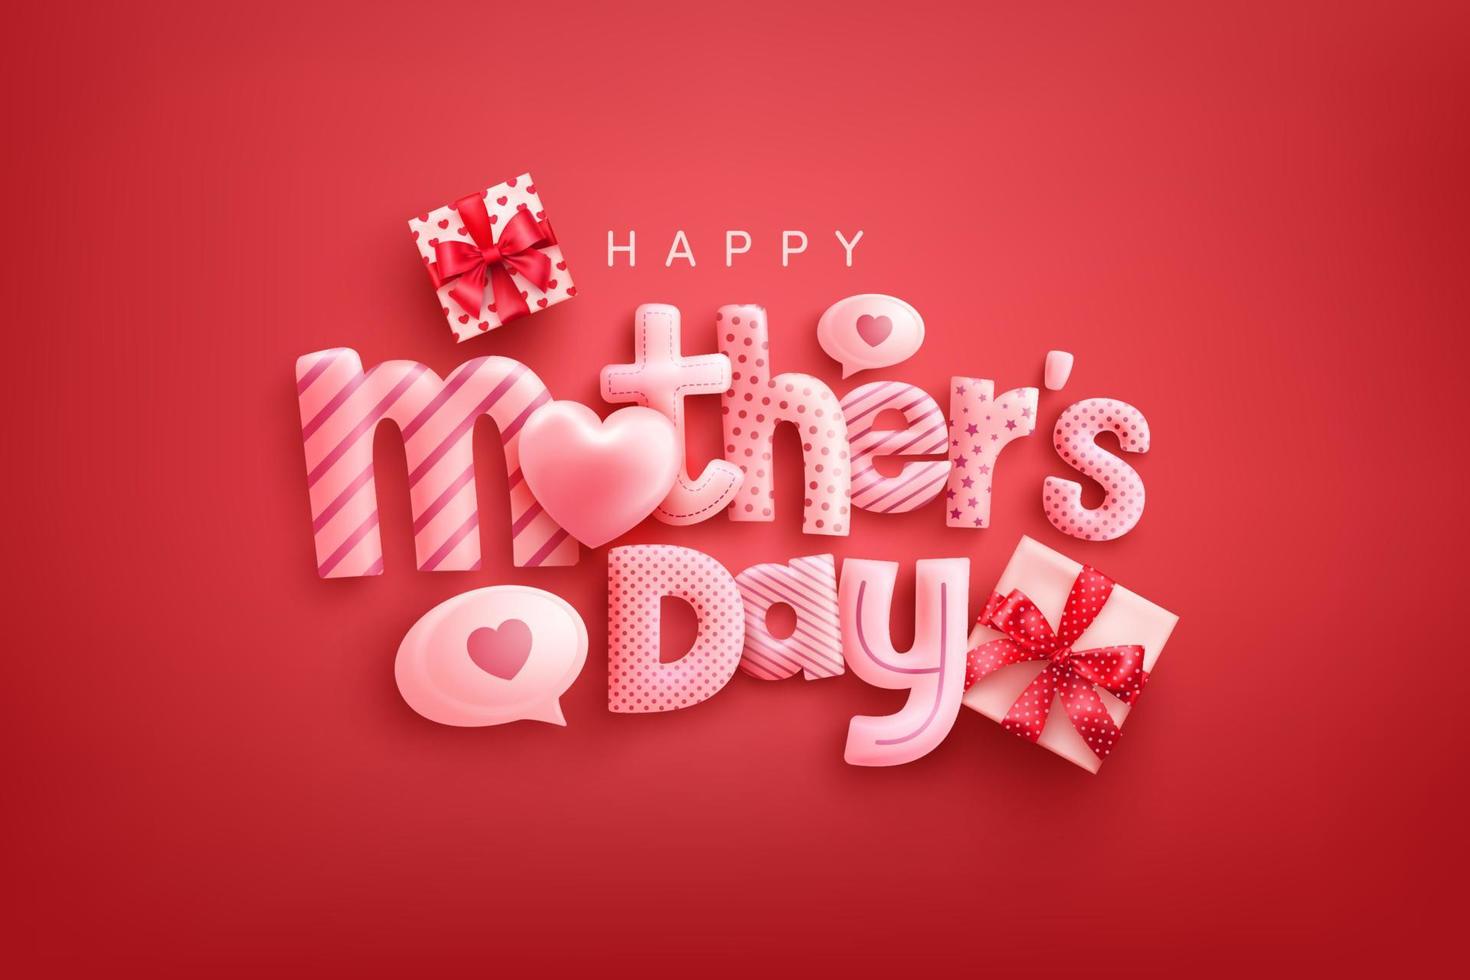 Happy Mother's Day Poster or banner with cute font,sweet hearts and gift box on red background.Promotion and shopping template or background for Love and Mother's day concept vector